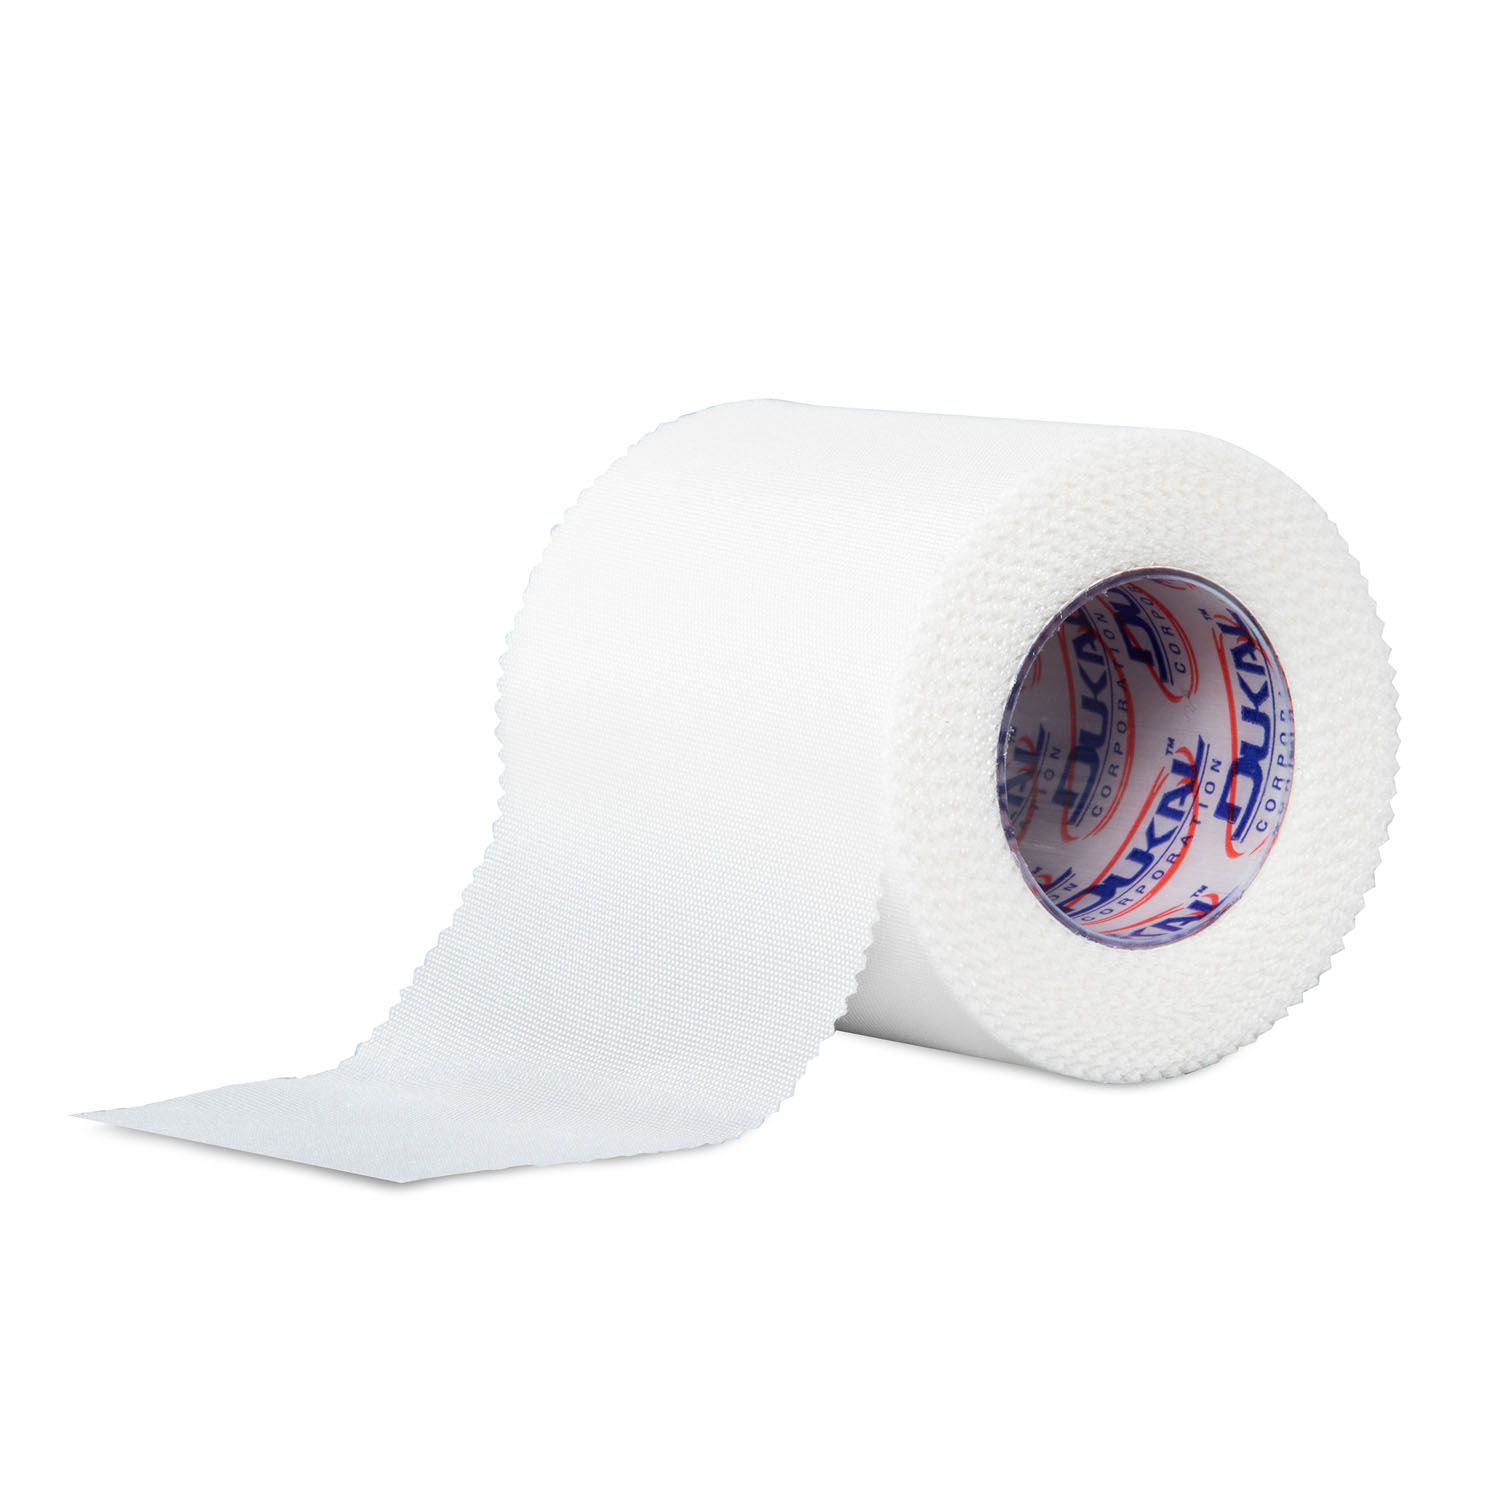 DUKAL SURGICAL TAPE - CLOTH : C210 BX $12.80 Stocked